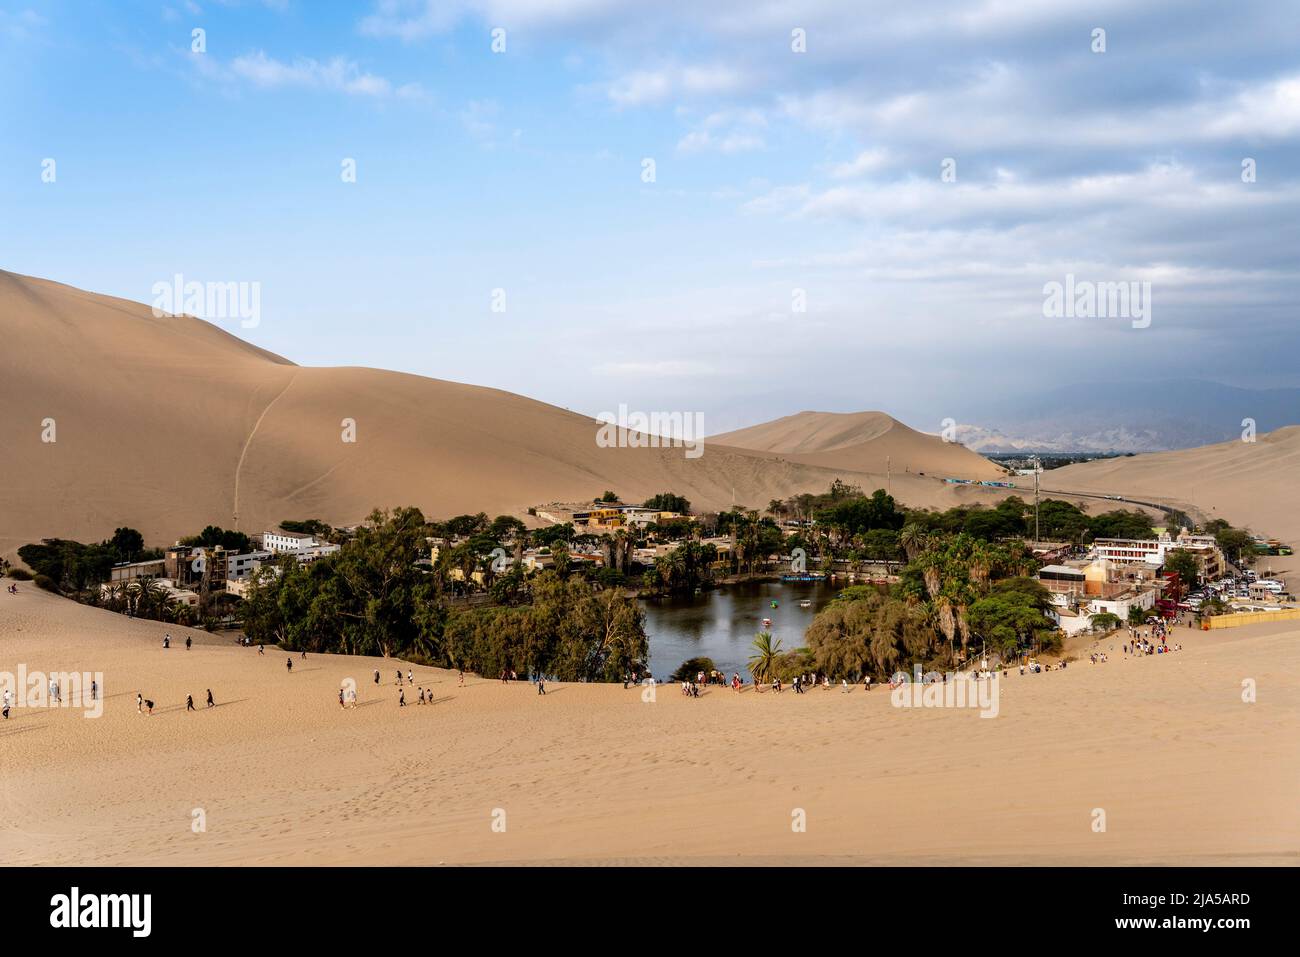 The Oasis Village Of Huacachina, Ica Province, Peru. Stock Photo